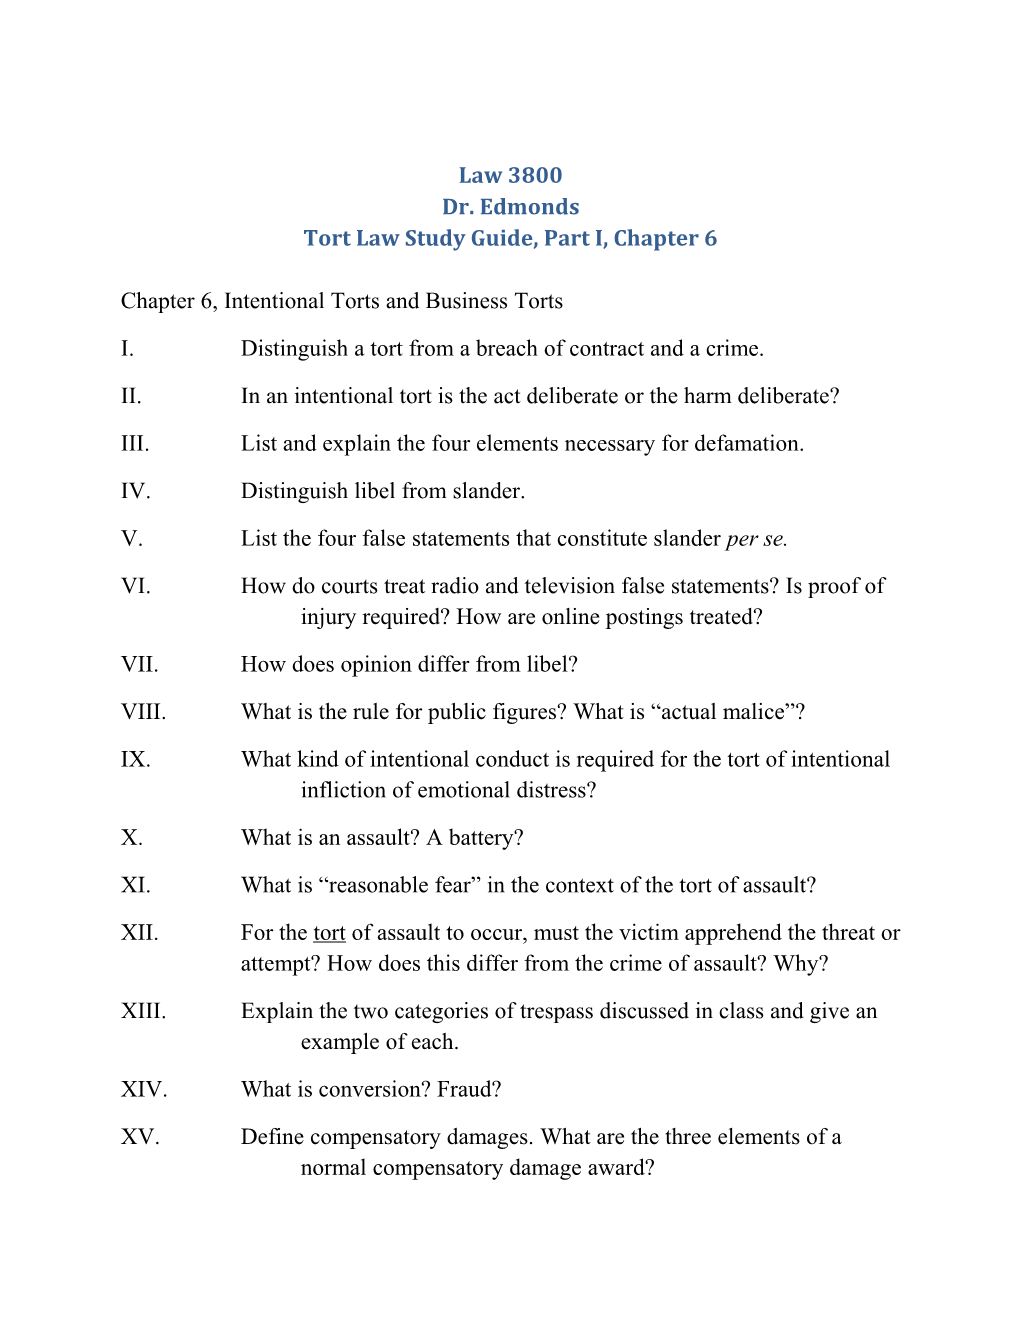 Tort Law Study Guide, Part I, Chapter 6